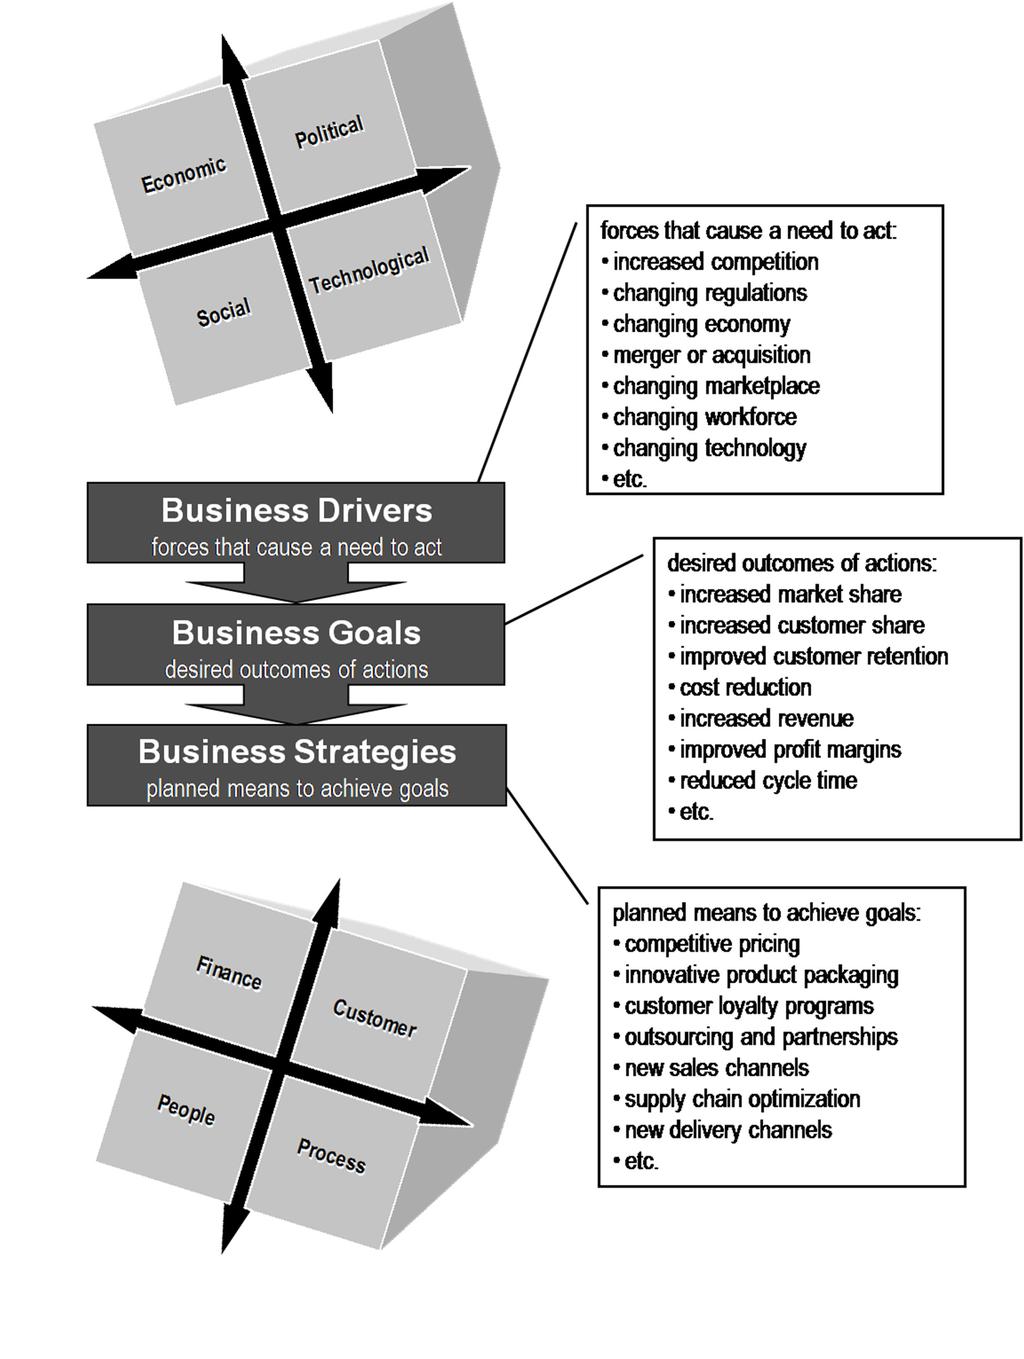 Business Data Models Business Context Business Drivers, Goals, and Strategies 2-2 TDWI.